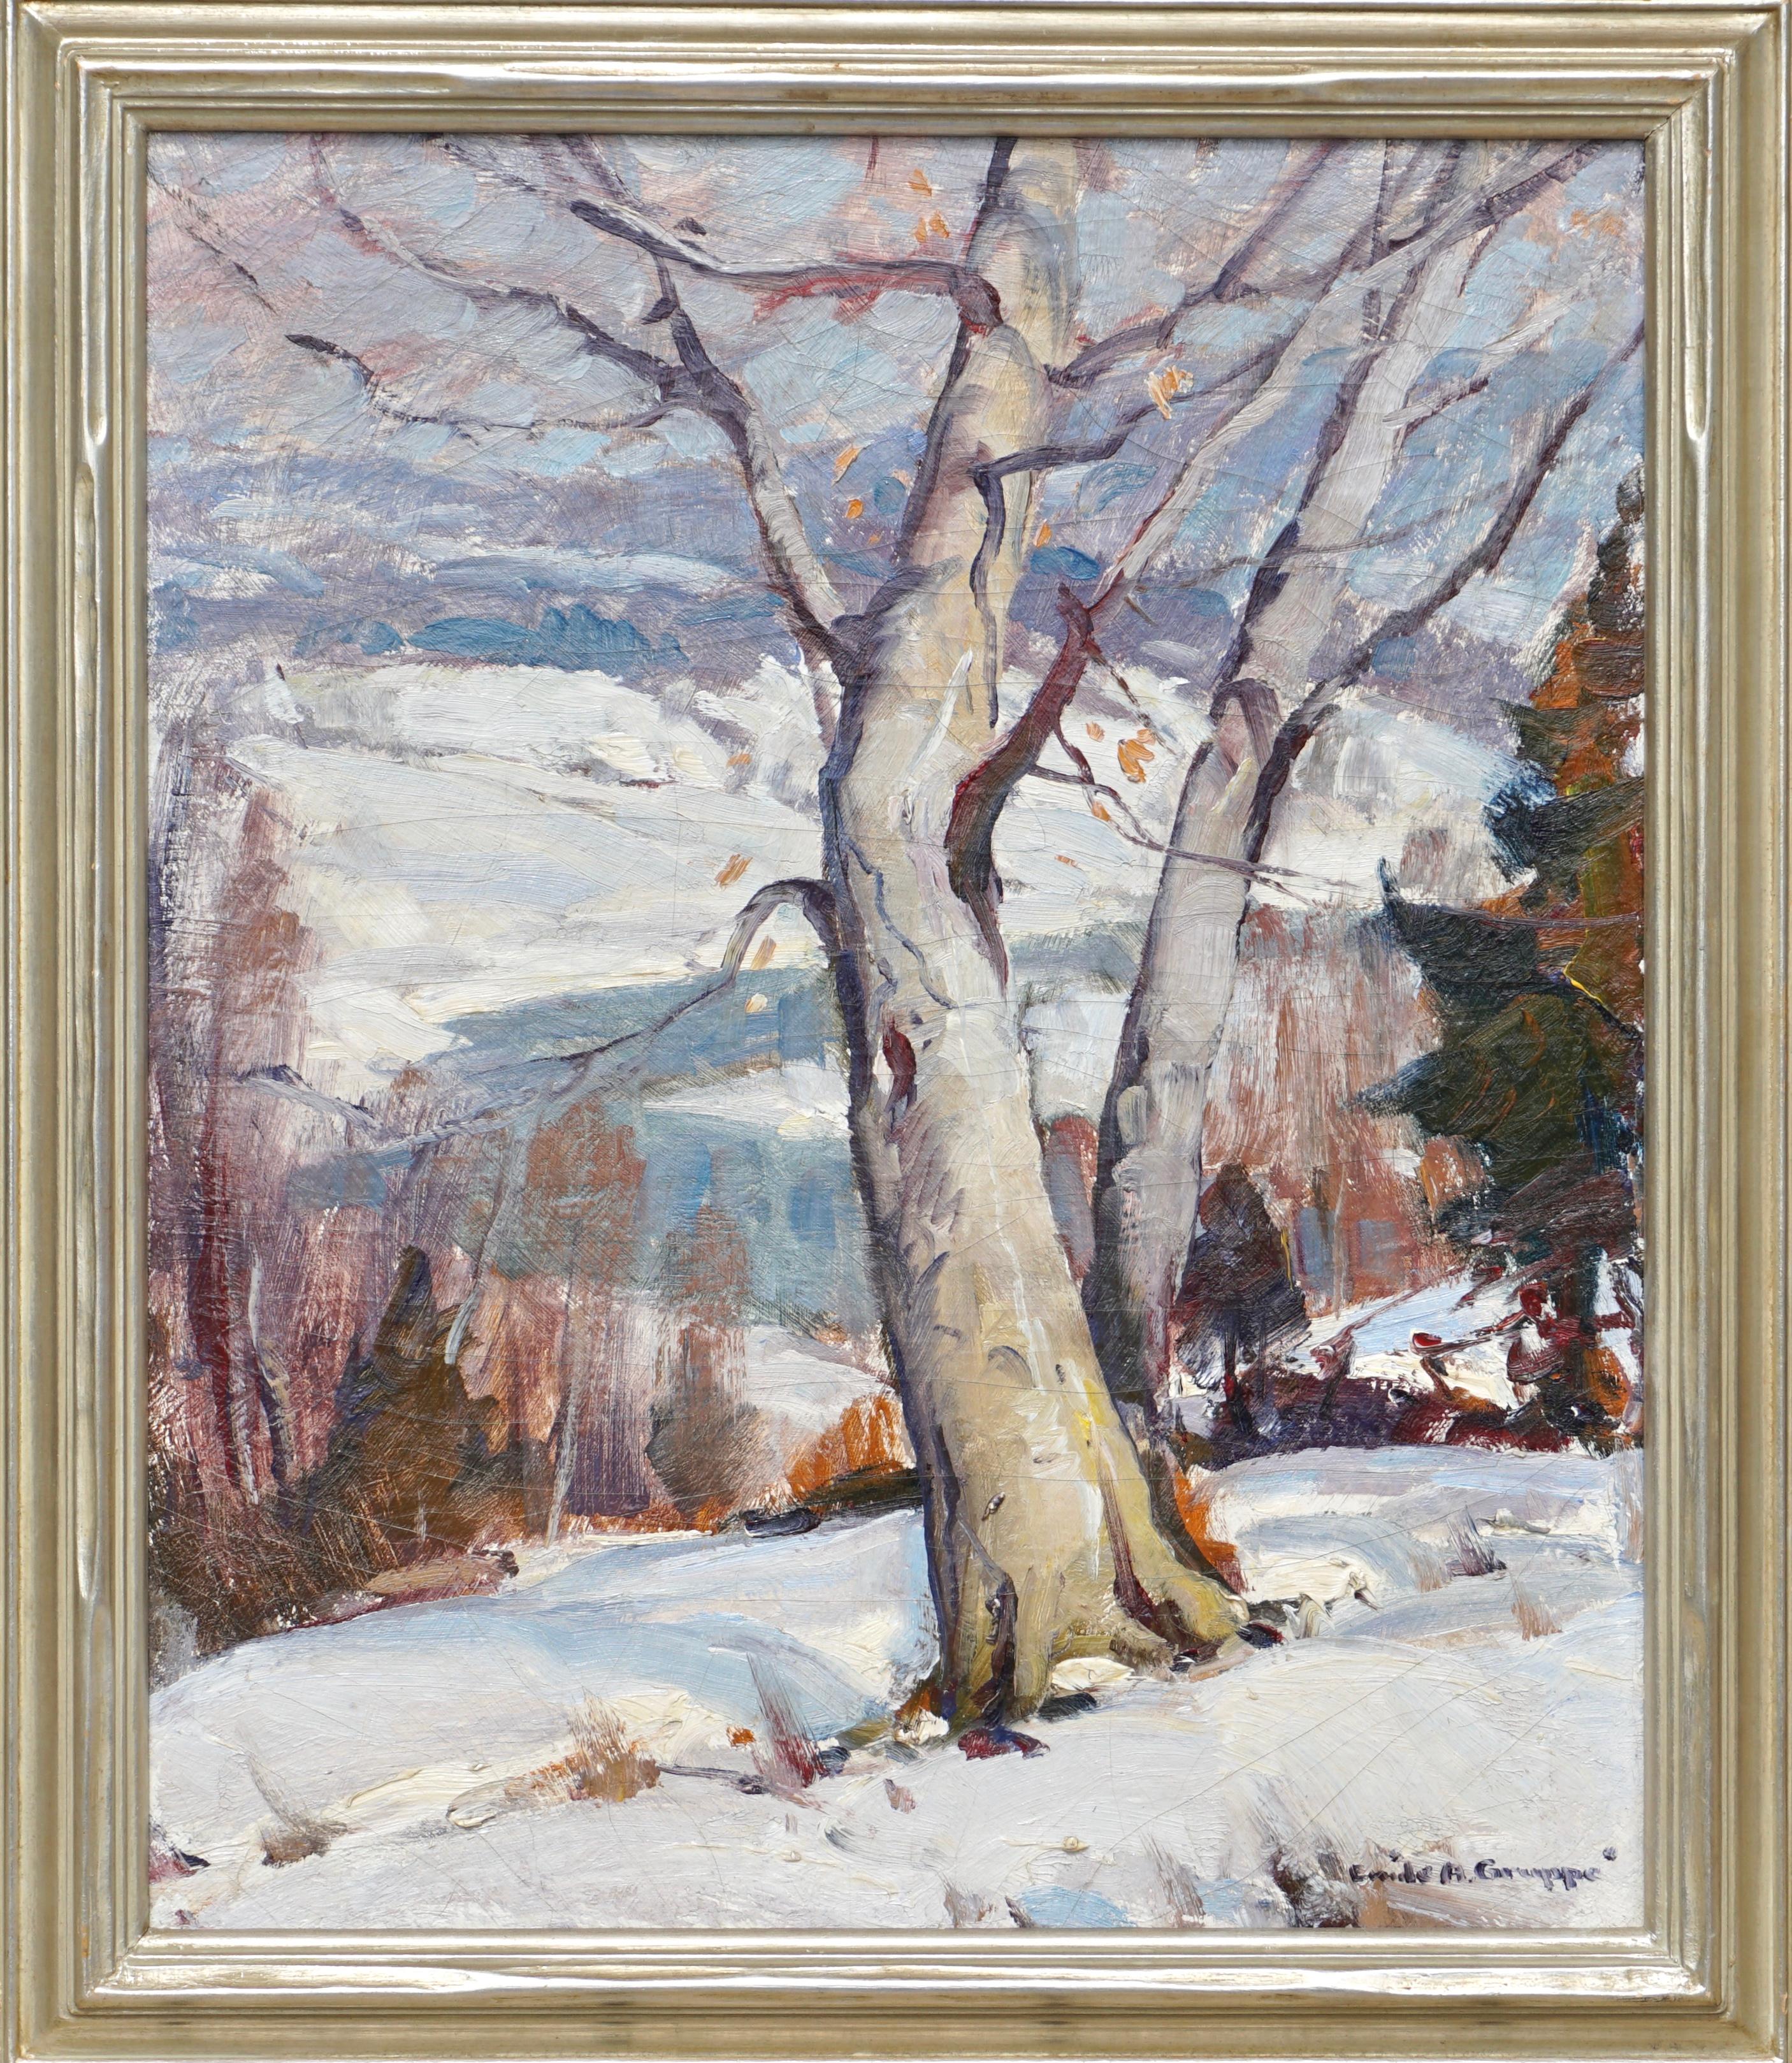 Emile Albert Gruppe (American, 1896-1978) Winter Morning, Vermont, Circa 1949 
Oil on canvas 24 x 20 inches (61.0 x 50.8 cm) 
Original Frame: 27.5 X 23.5 Inches
Signed lower right: Emile A. Gruppe Titled on the stretcher: Winter Morning, Vermont